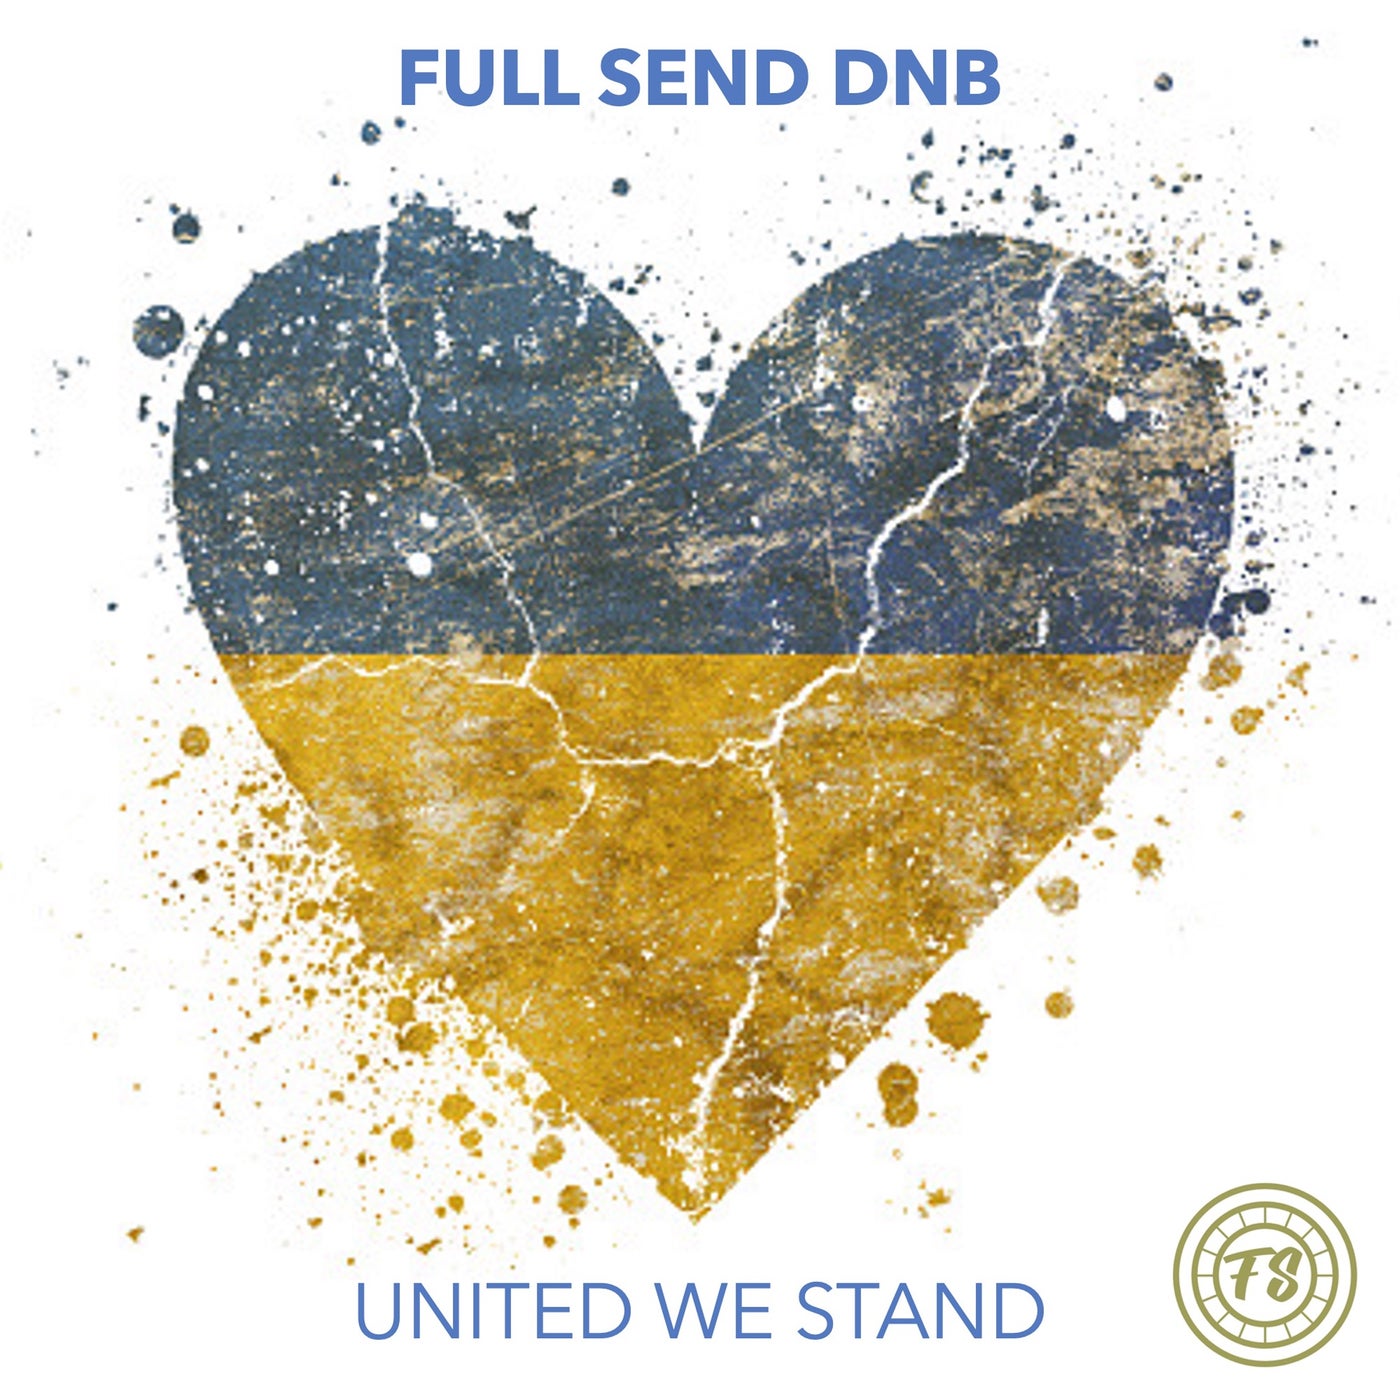 Full Send dnb: United We Stand